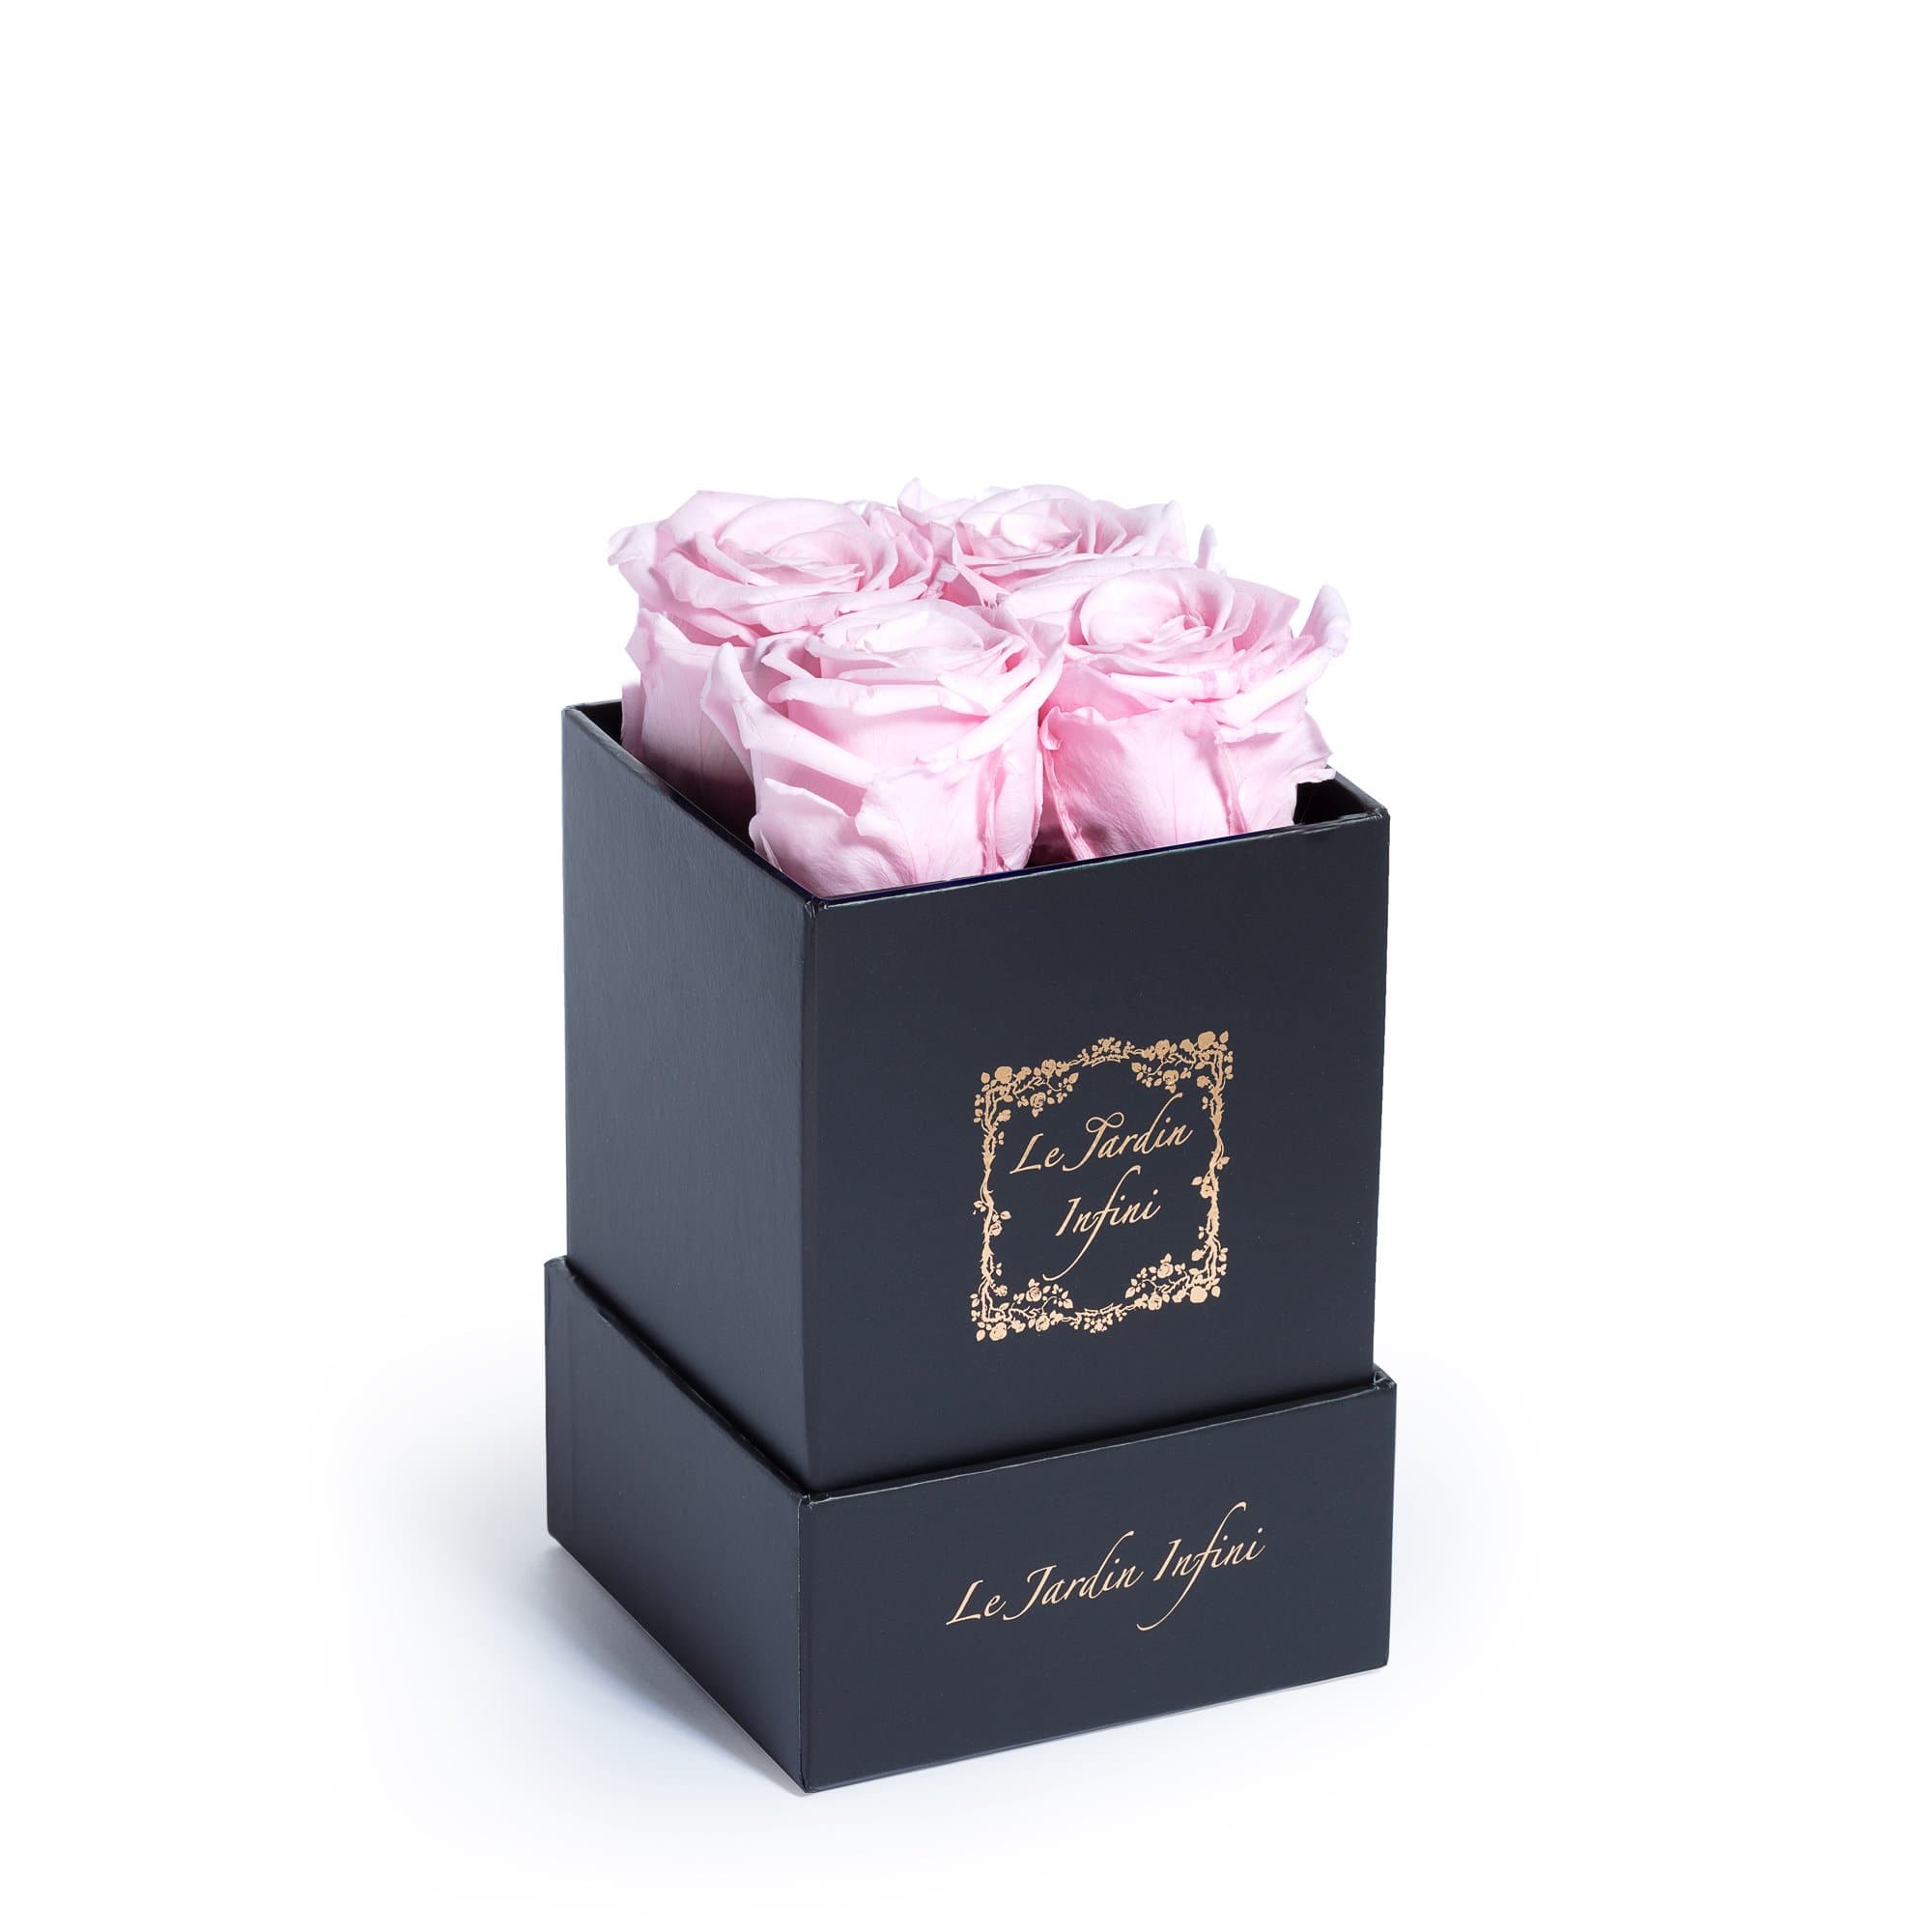 Soft Pink Preserved Roses - Small Square Black Box - Le Jardin Infini Roses in a Box